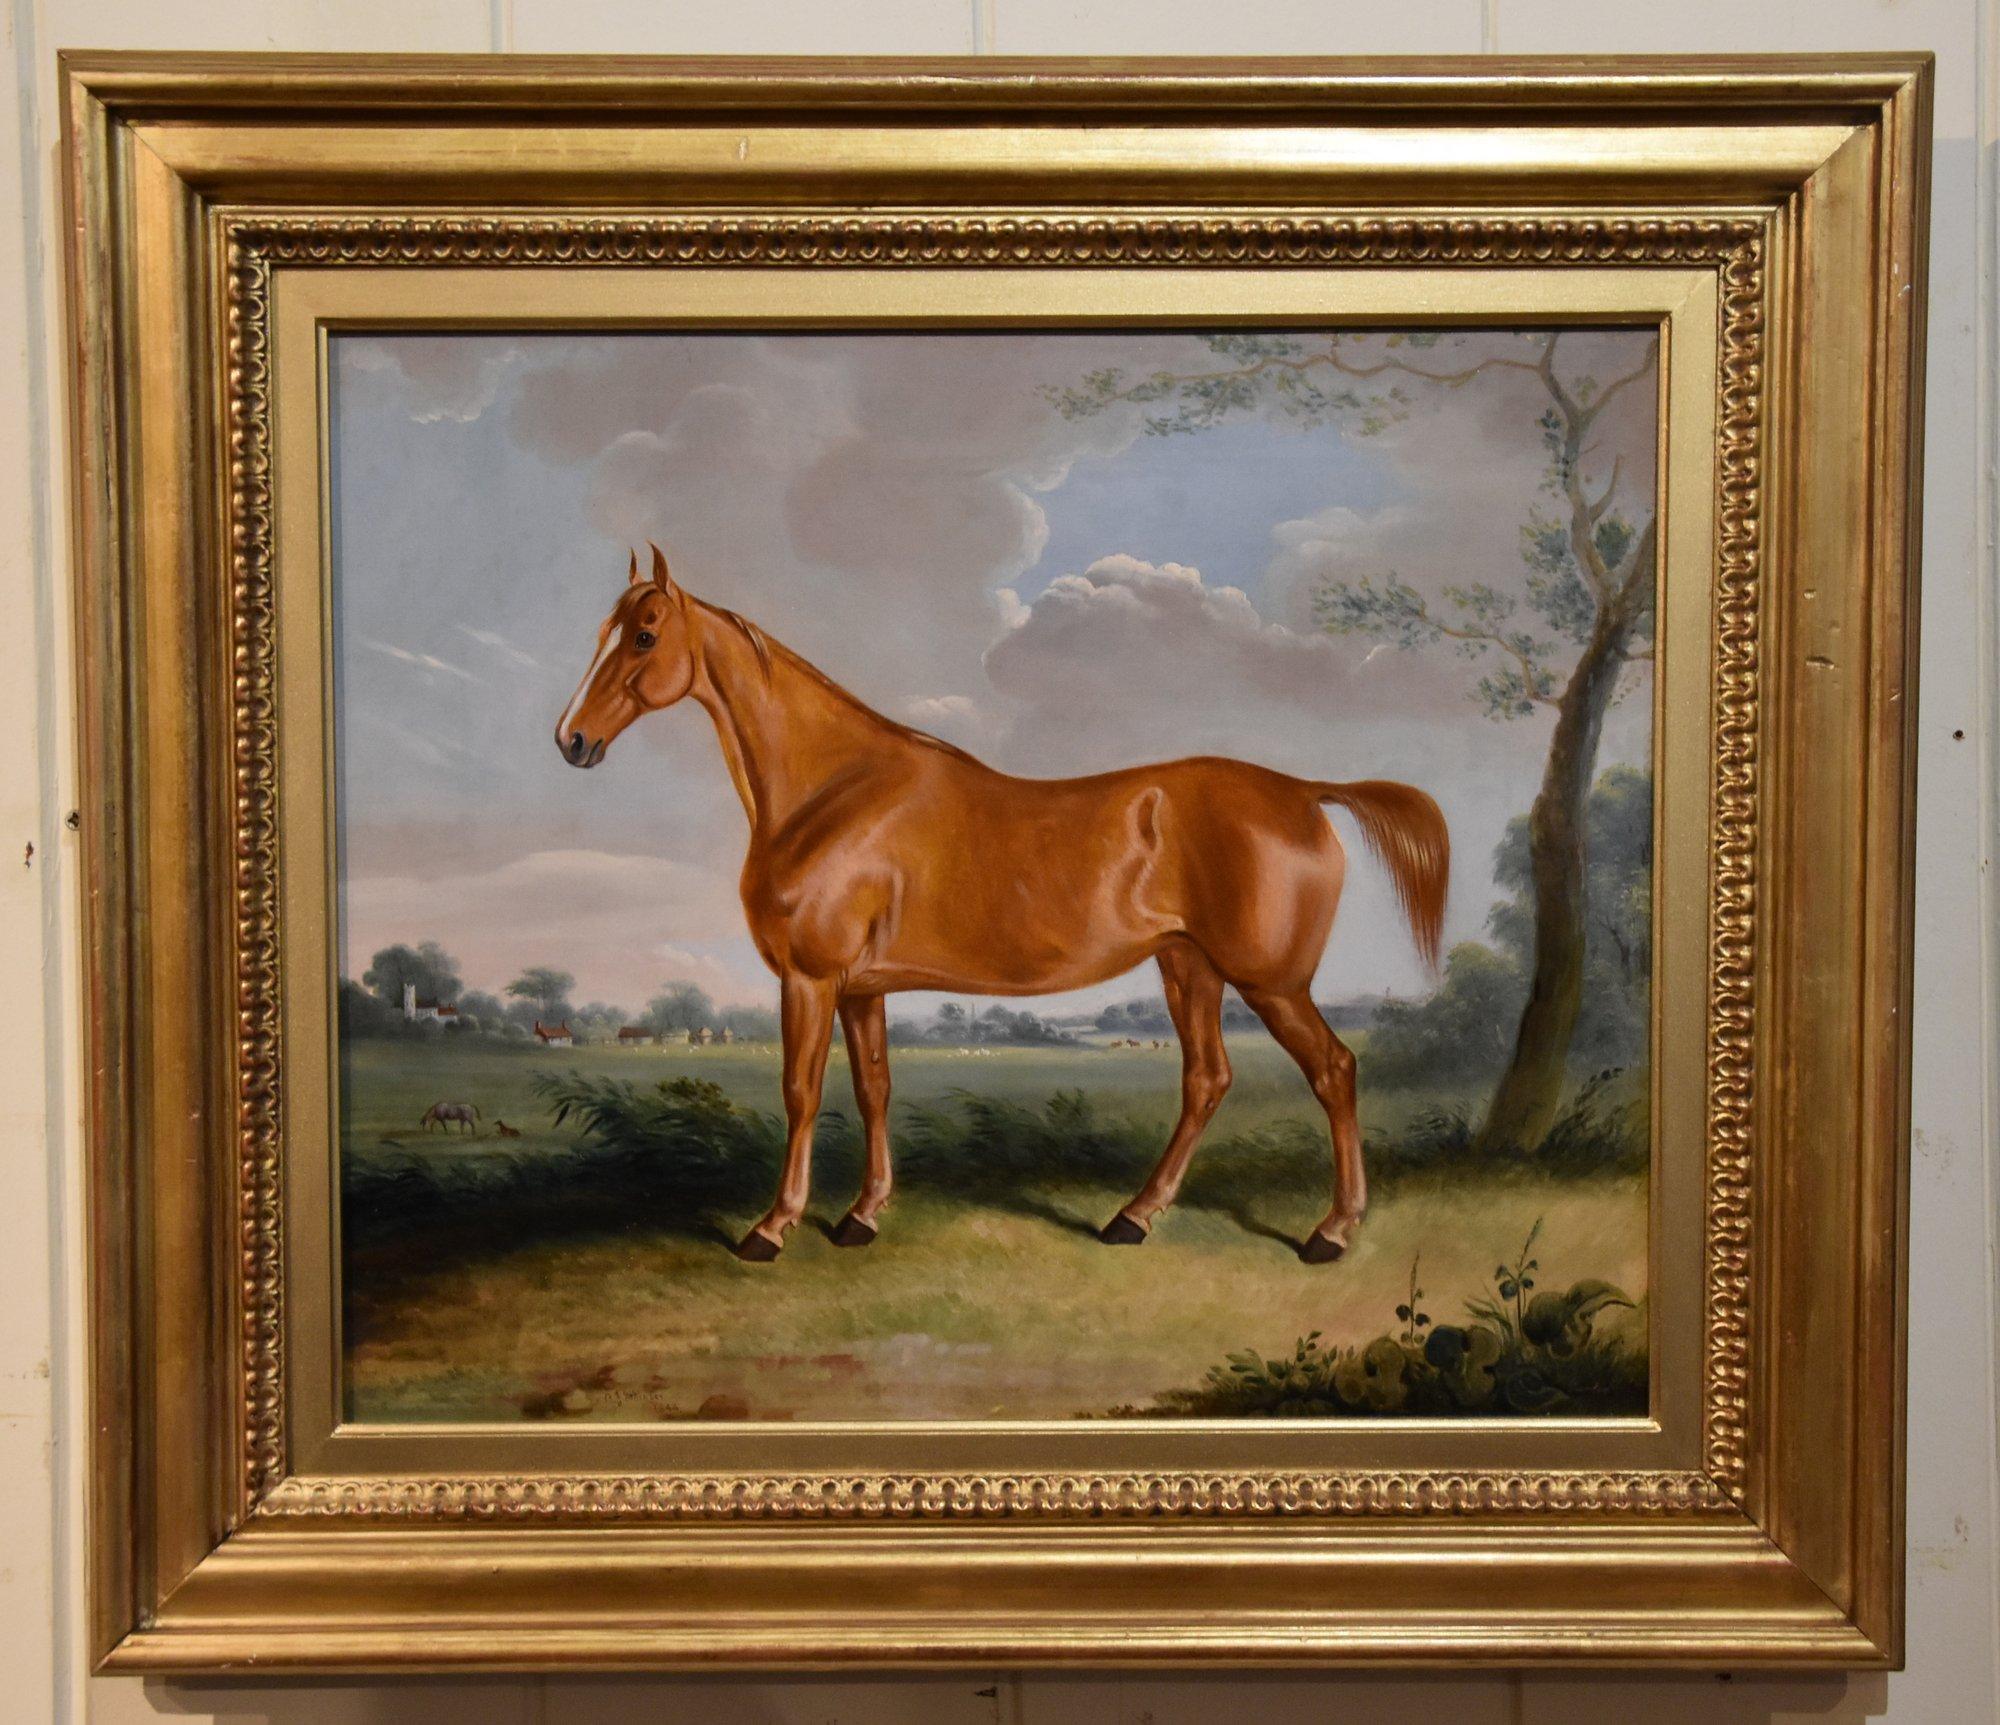 Oil Painting by Cornelius Jansen Walter Winter "A Favourite Hunter" 1817- 1891. Born in Bungay the son of a stained glass painter. Pupil of Edwin Cooper of Beccles. Painted Norfolk Antiquities and buildings. Oil on canvas. Signed and dated 1844.